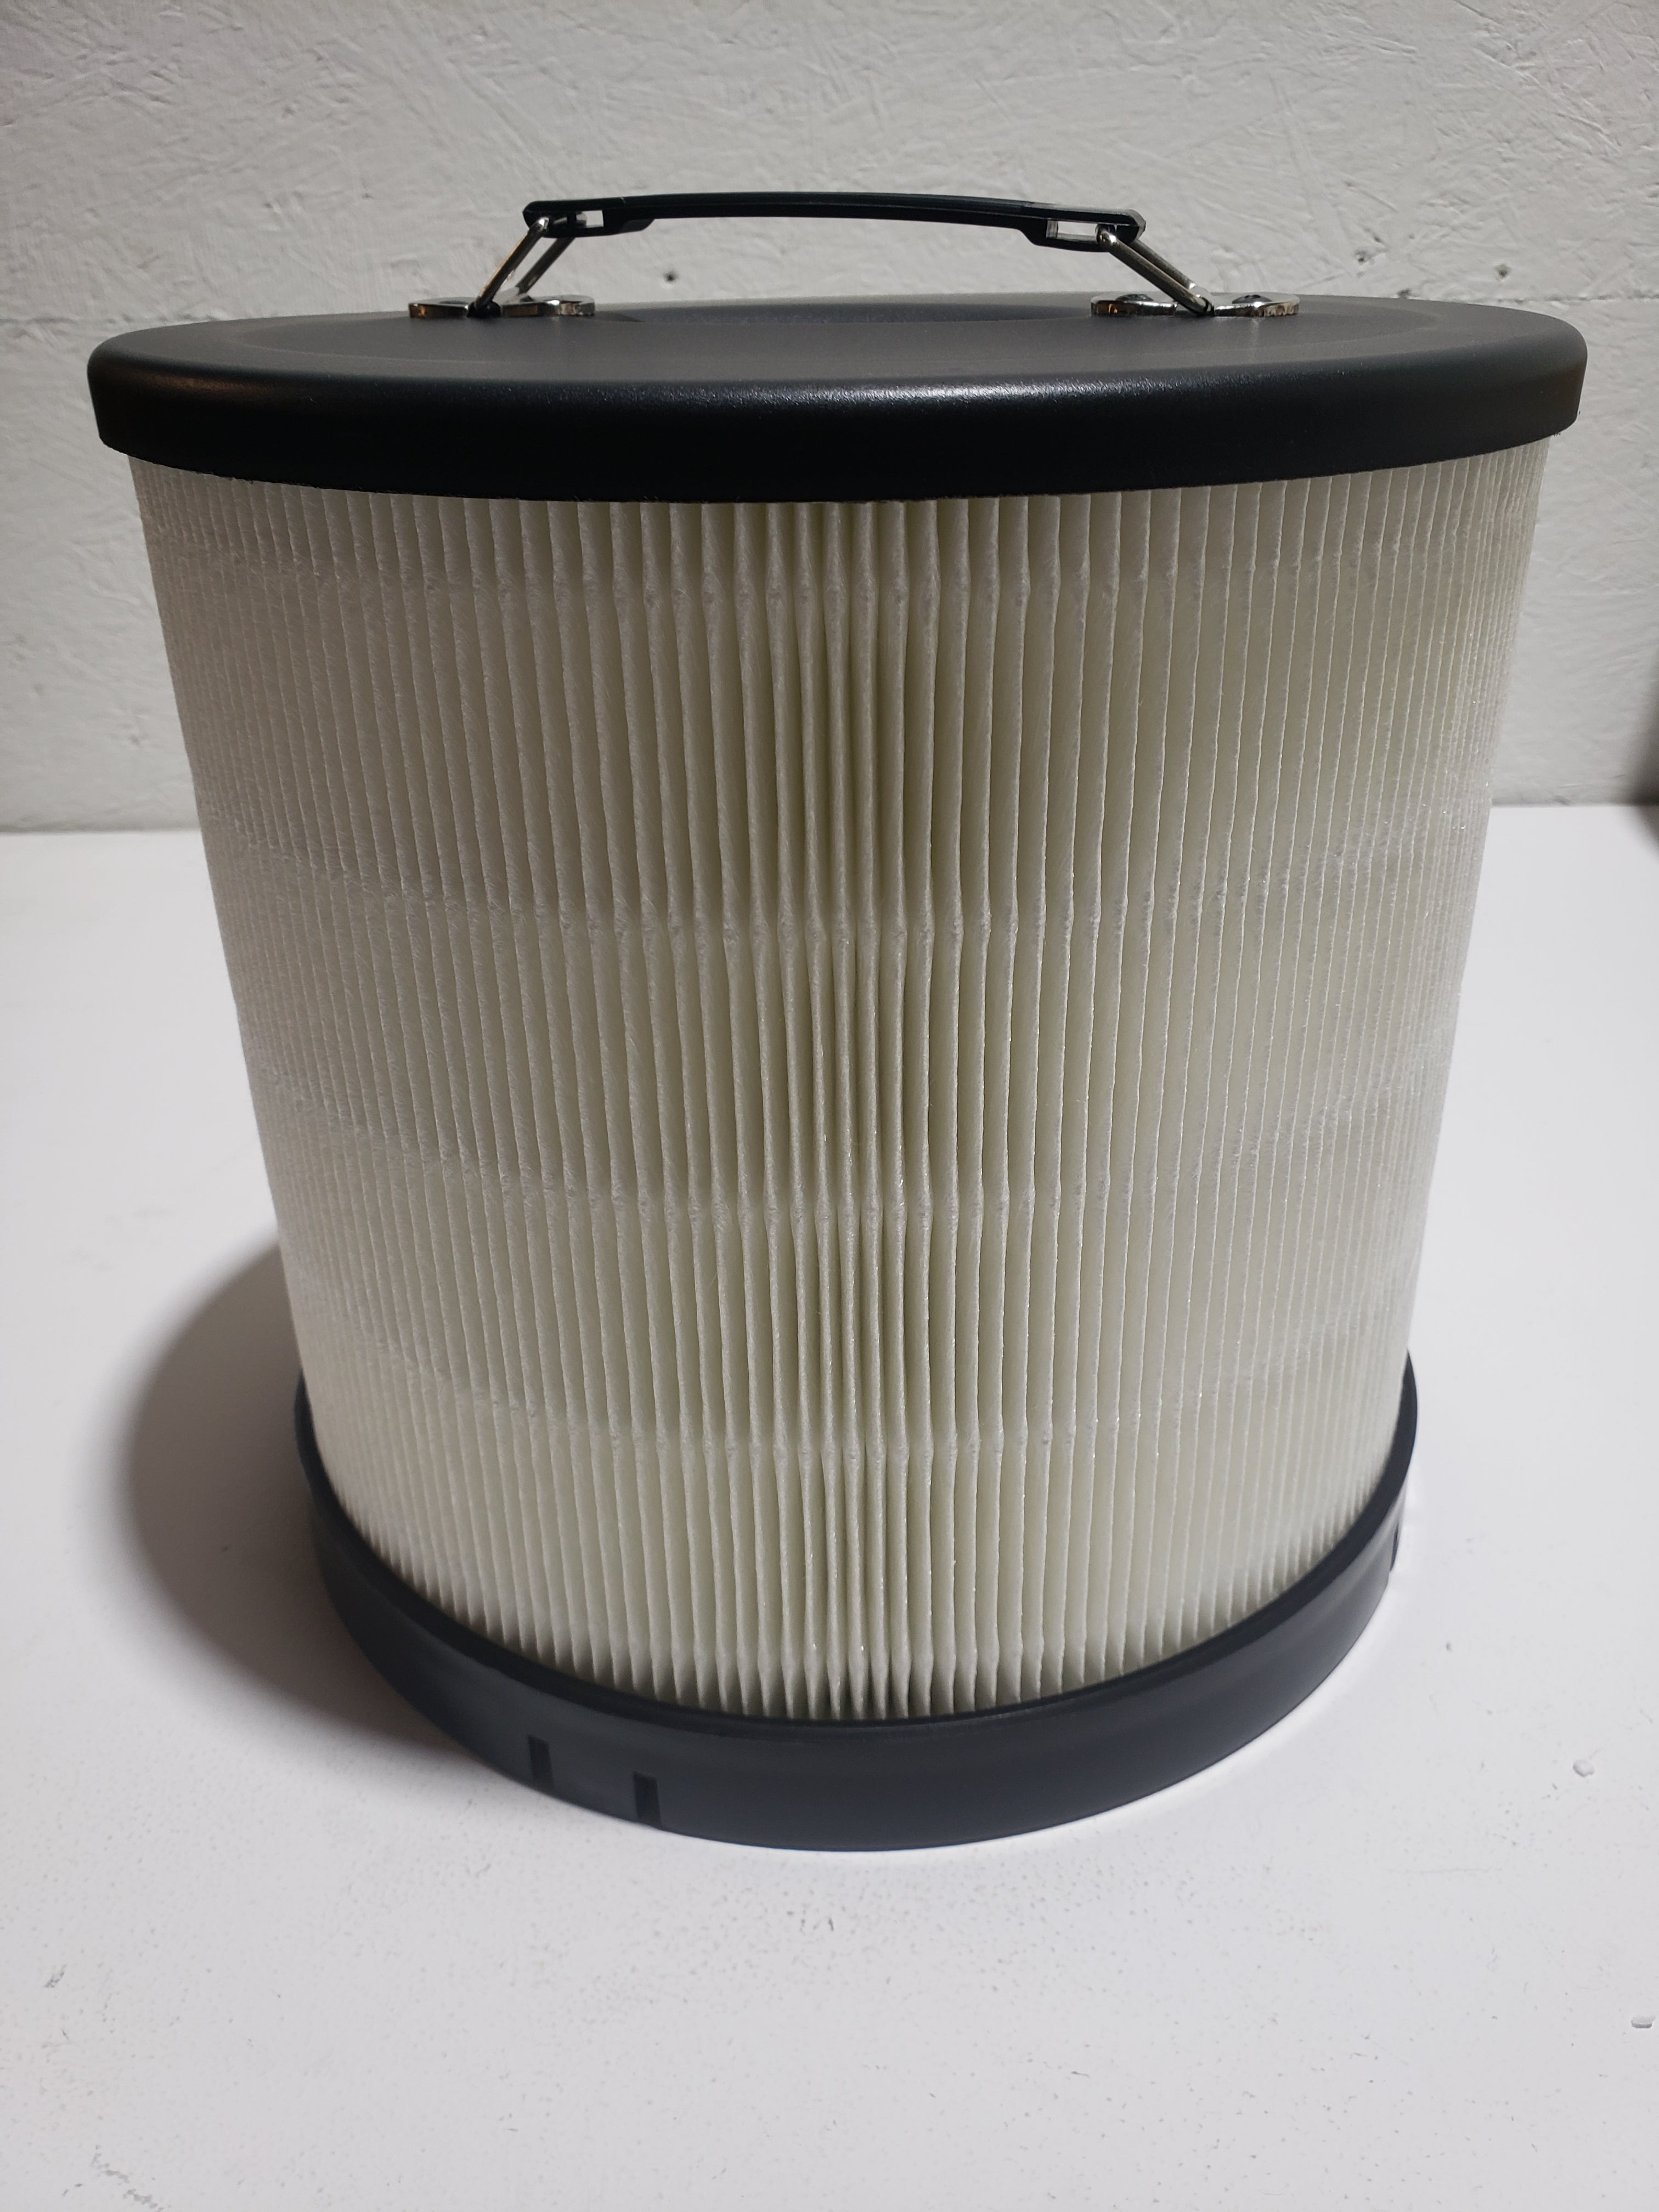 HEPA Filter Attachment for Syclone Low Profile Air Mover - 1683-5720